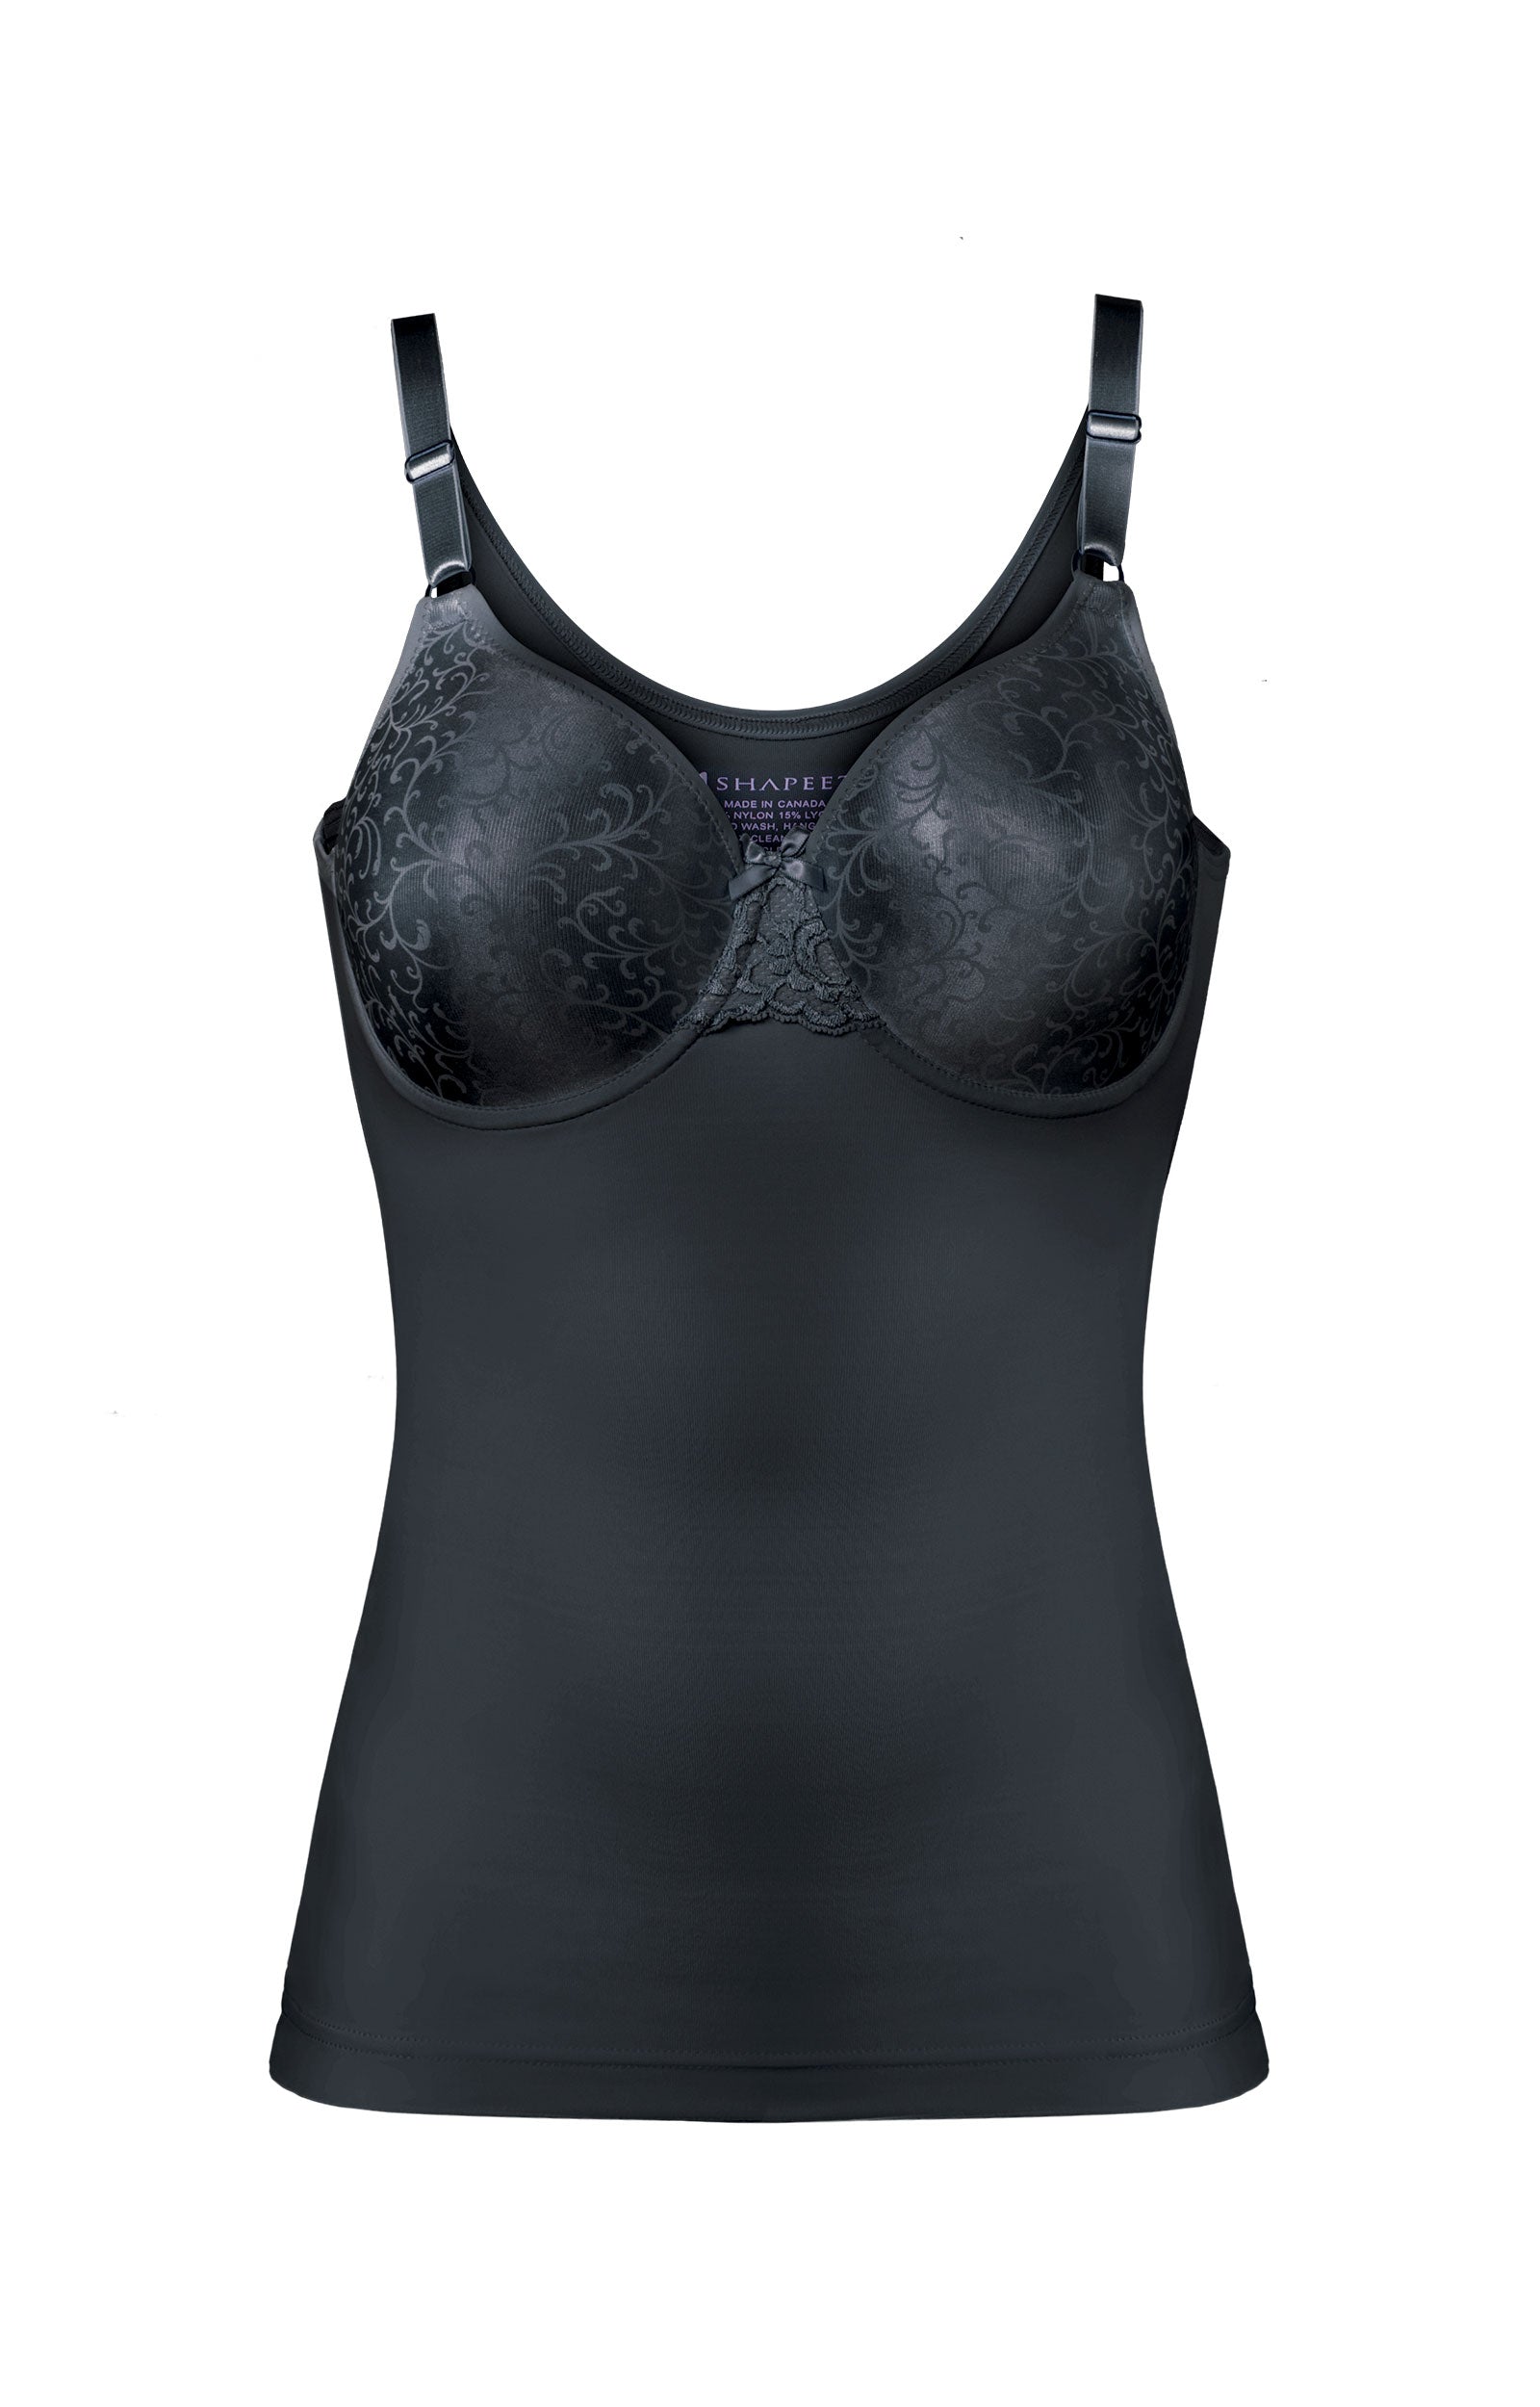 The Original Tankee Short Back-Smoothing Ultra Comfortable Tee-Shirt Bra  Virtually Invisible Under Knit Tops - Shapeez - Theme Dev